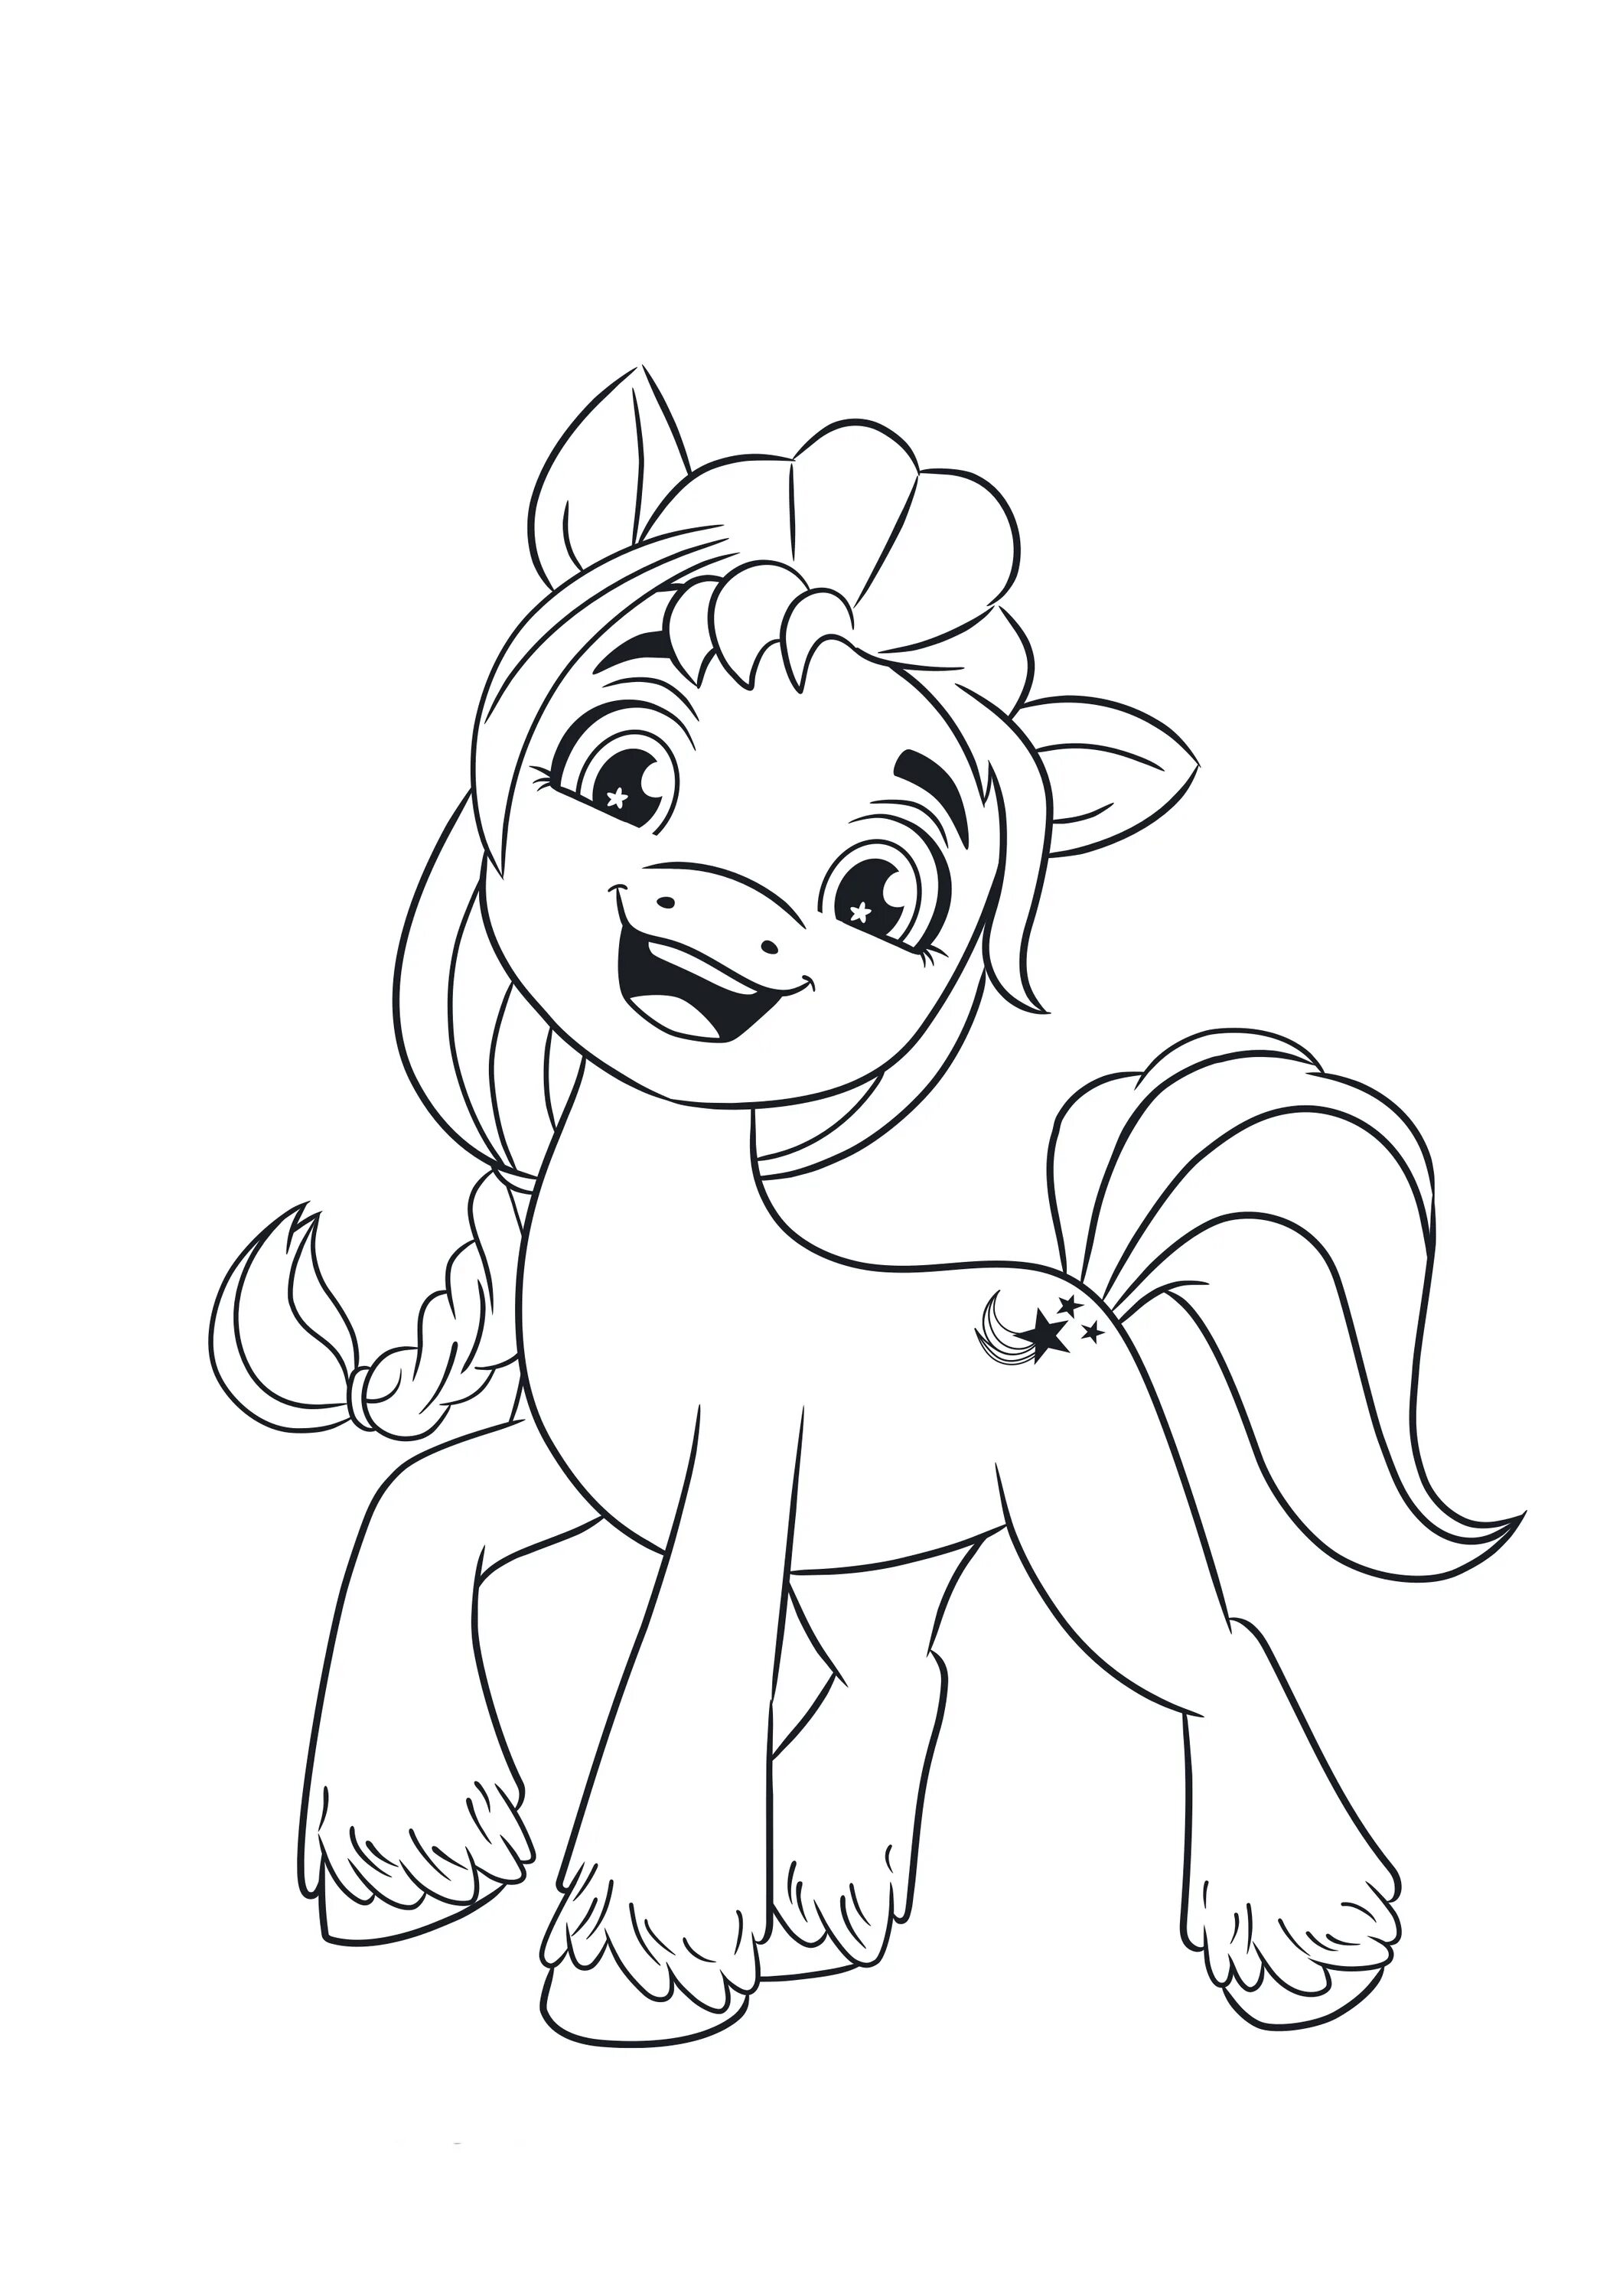 Playtime easy pony coloring